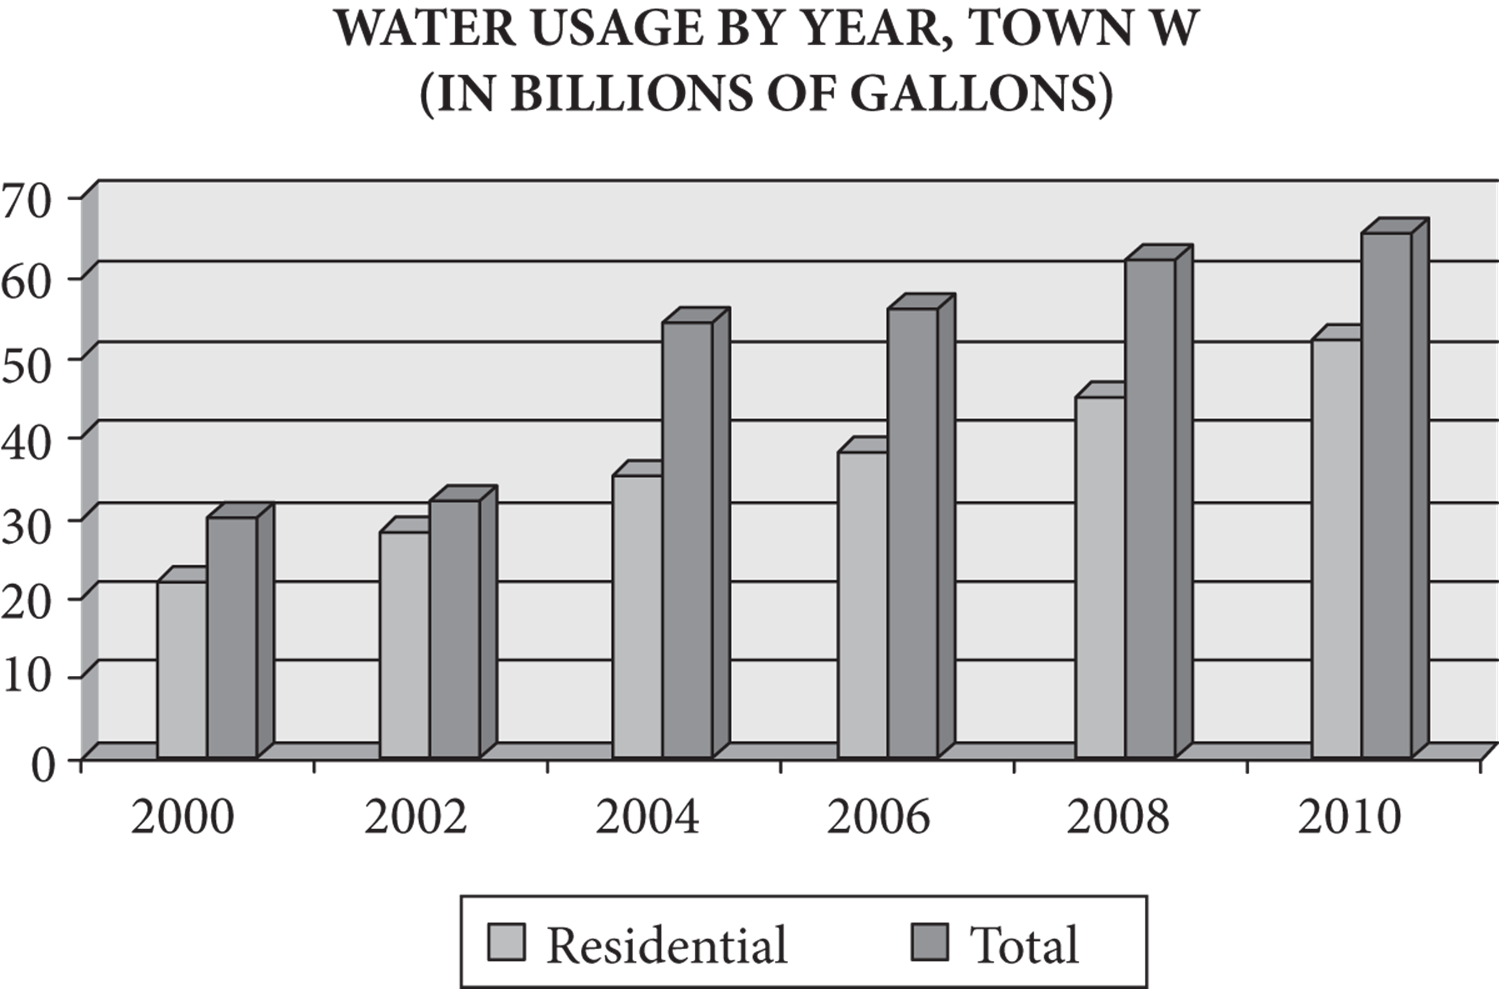 Bar graph of water usage by year in town W in billions of gallons. Points from 0 to 70 billion in multiples of 10 billion are on the vertical axis, while years from 2000 to 2010 are on the horizontal axis. Residential usage, represented by light grey bars, is plotted beside total usage, represented by dark grey bars. Residential usage is between 20B and 30B in 2000 and 2002, between 30B and 40B in 2004 and 2006, over 40B in 2008, and over 50B in 2010. Total usage is 30B in 2000, over 30B in 2002, over 50B in 2004 and 2006, and over 60B in 2008 and 2010.